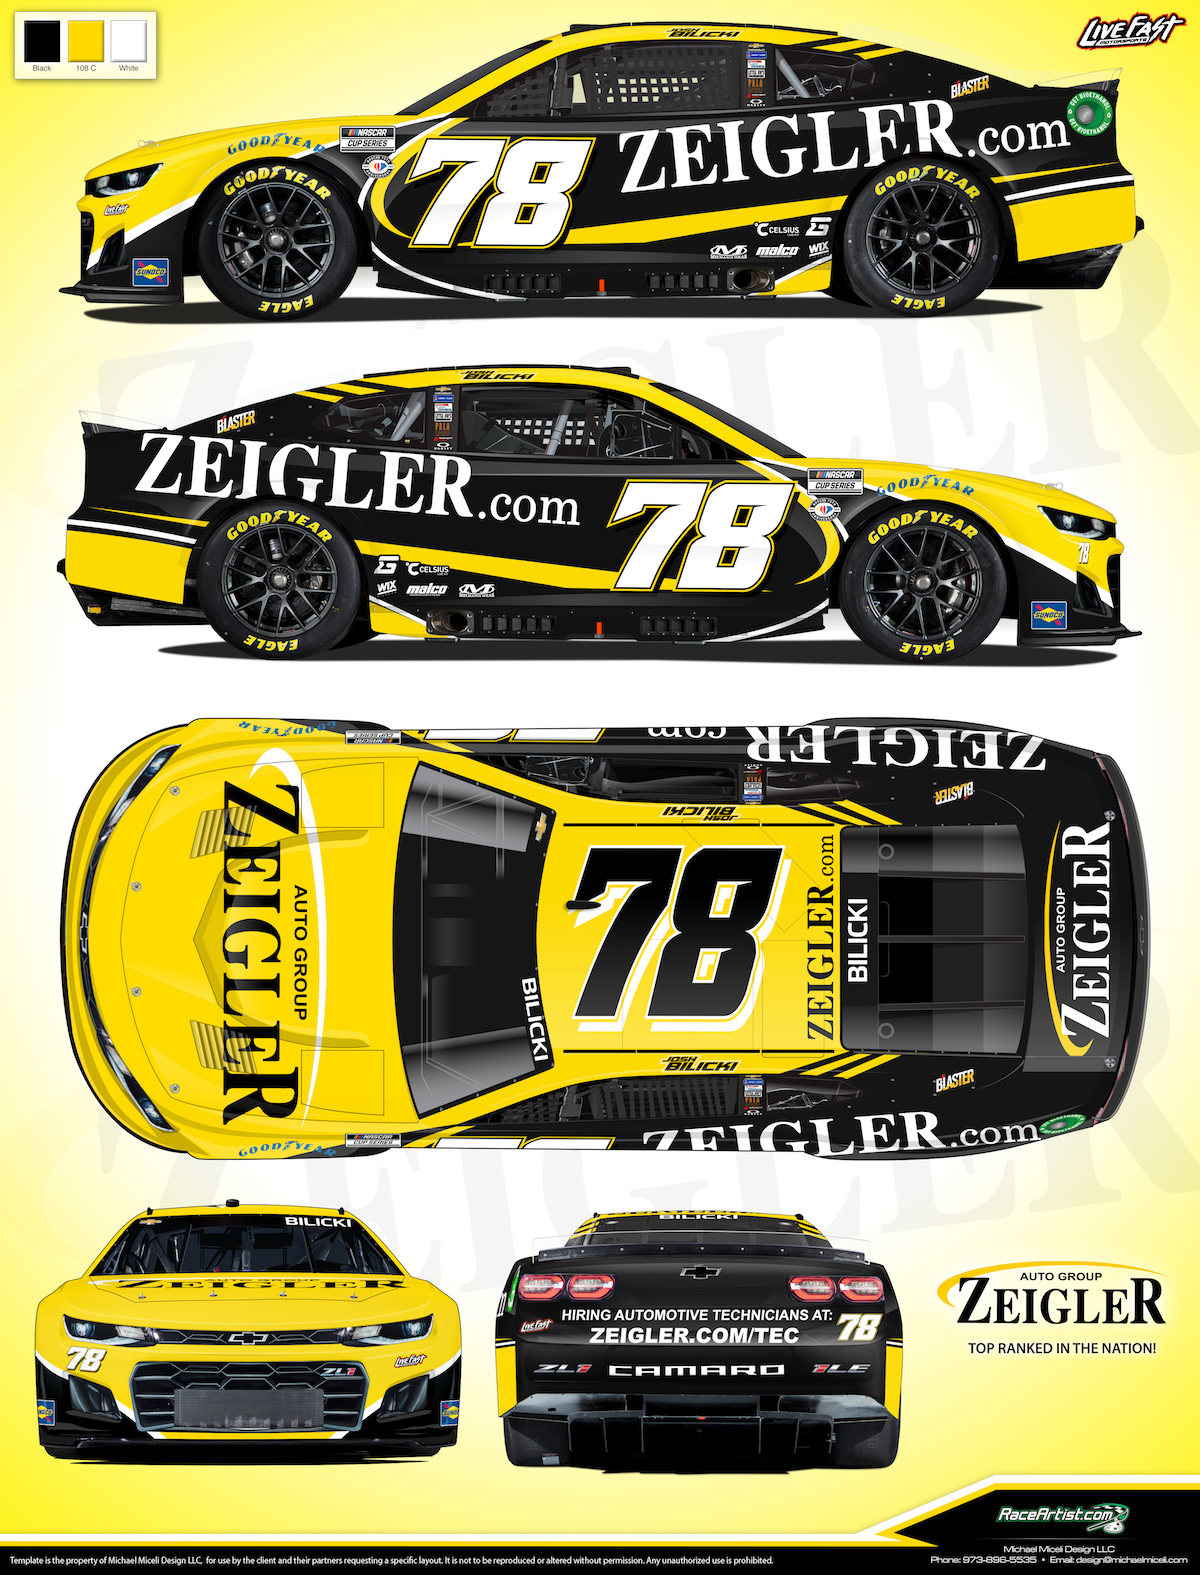 New Zeigler.com 78 Scheme for 2023 NASCAR Cup Series Season with Live Fast Motorsports and Josh Bilicki